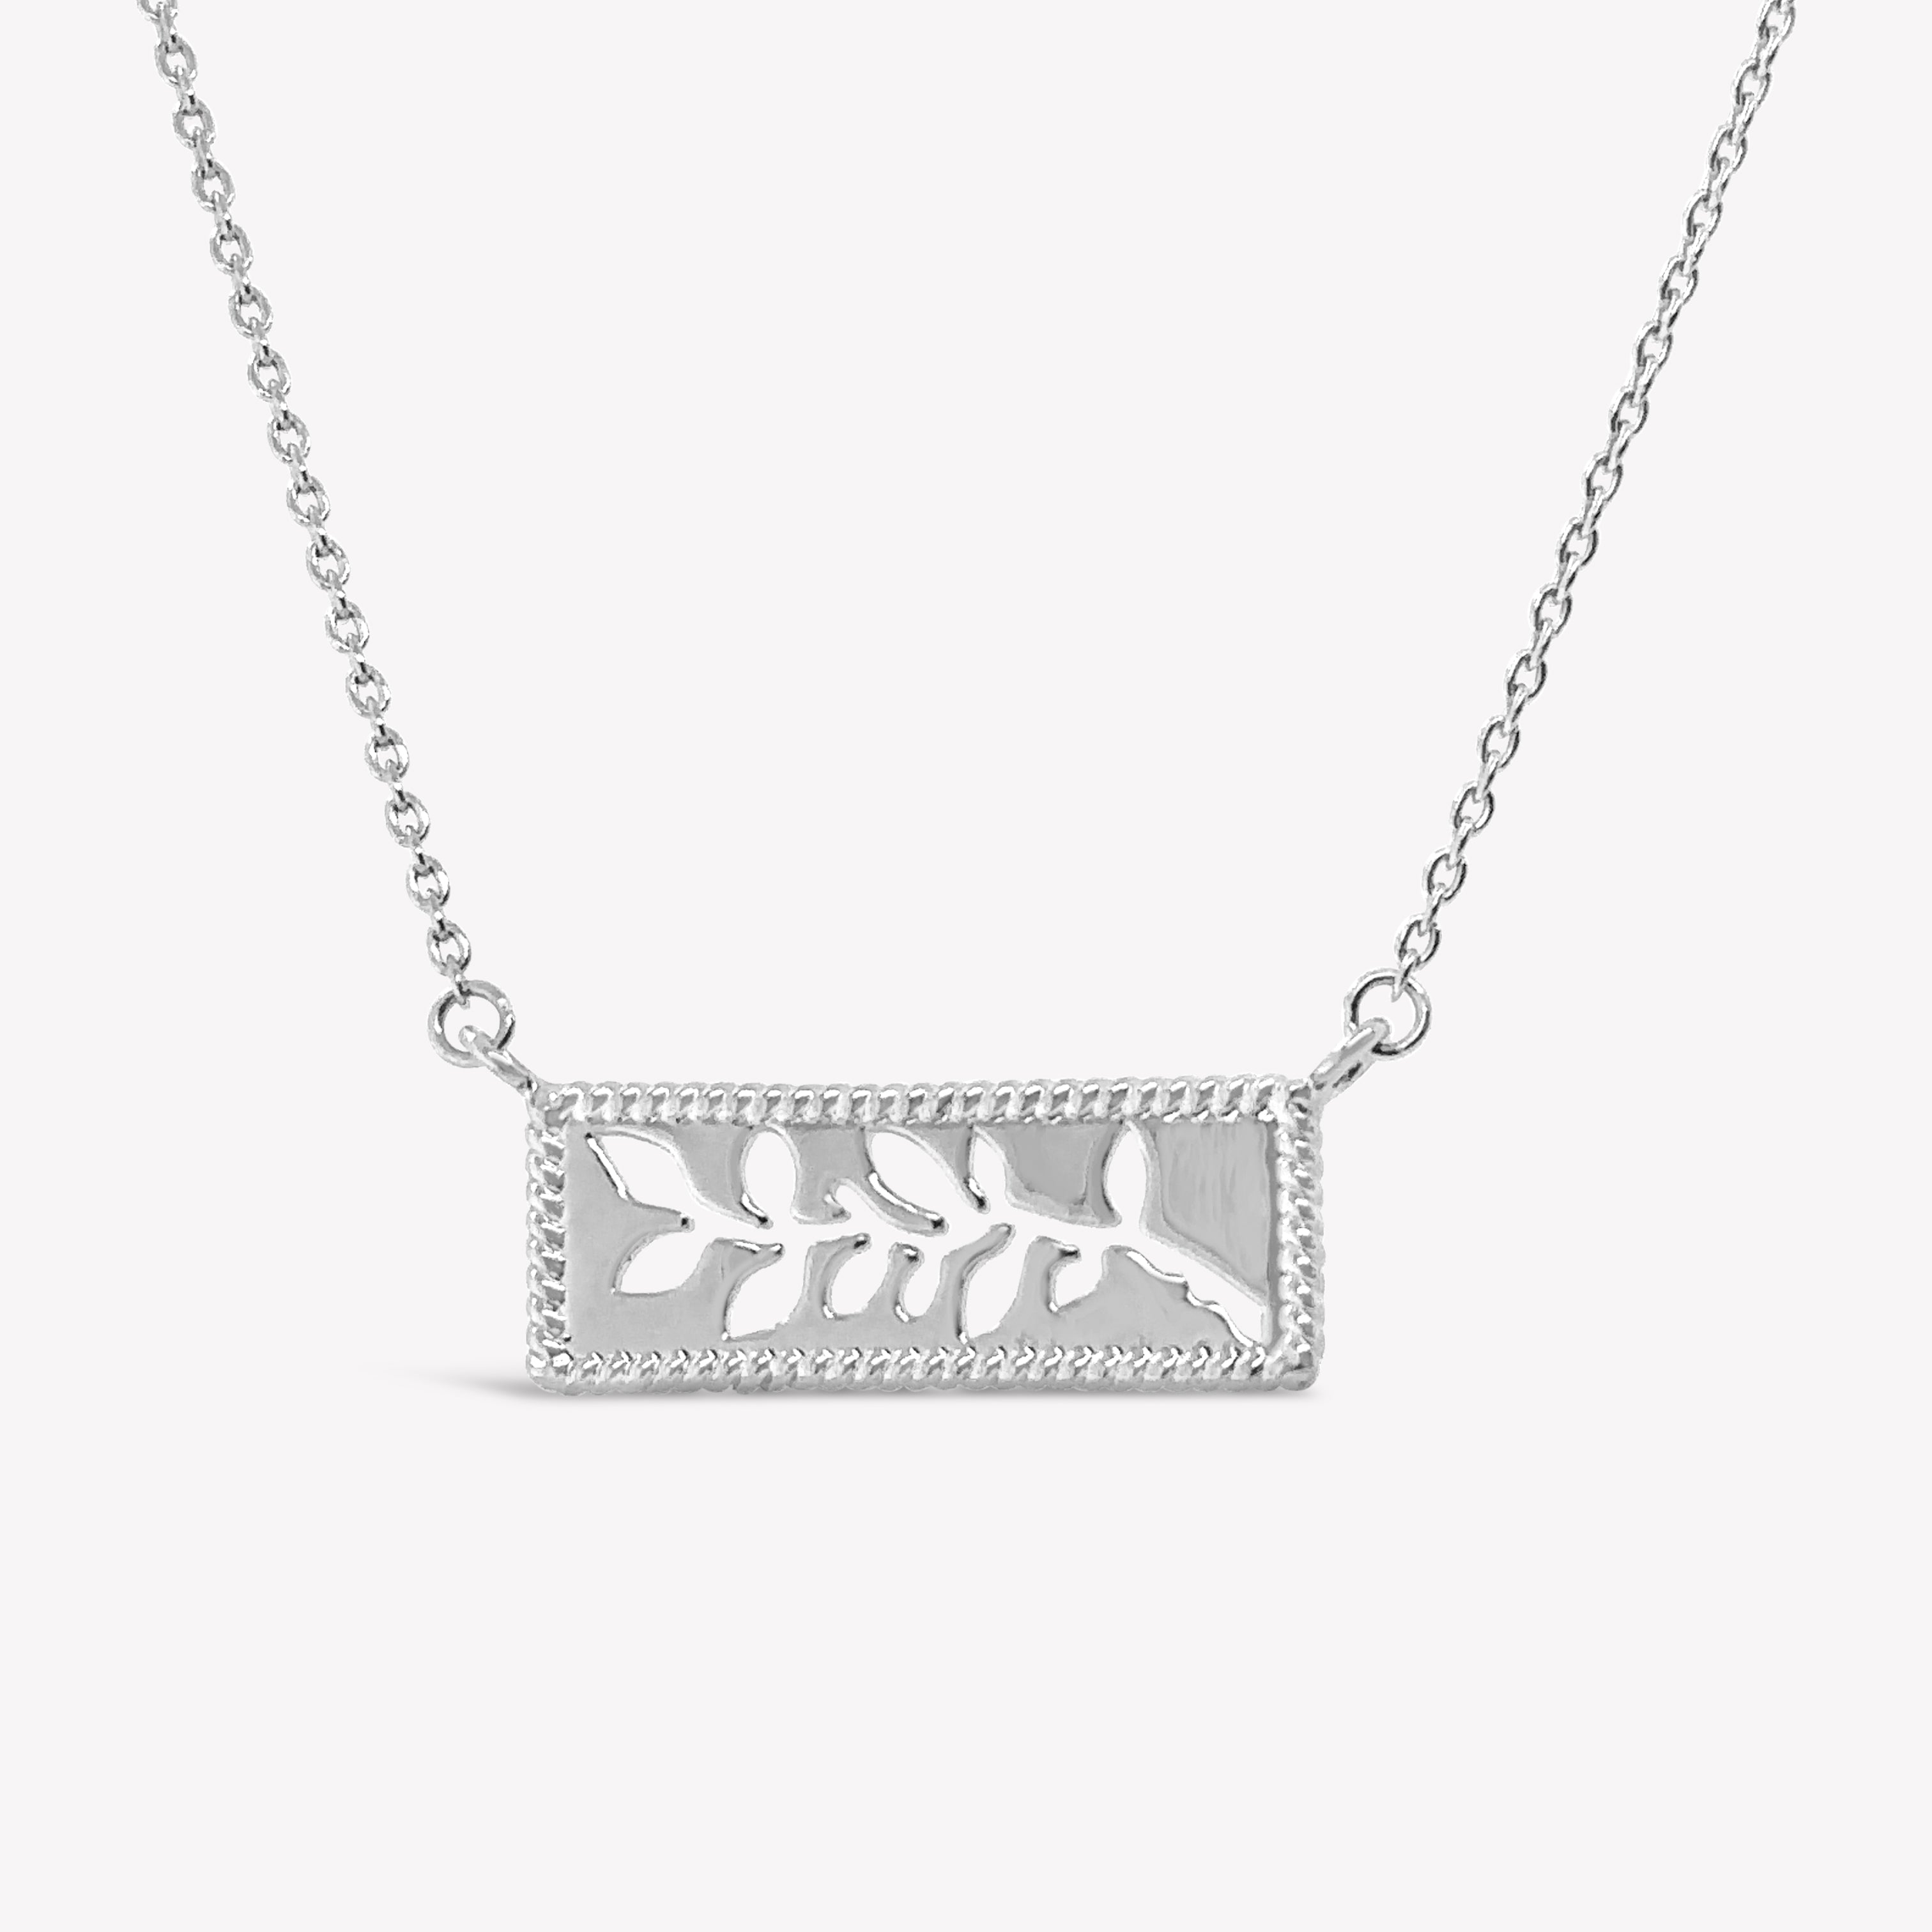 Close up of the intricately designed sterling silver Olive Branch Necklace from the Rooted Collection by Rizen Jewelry.